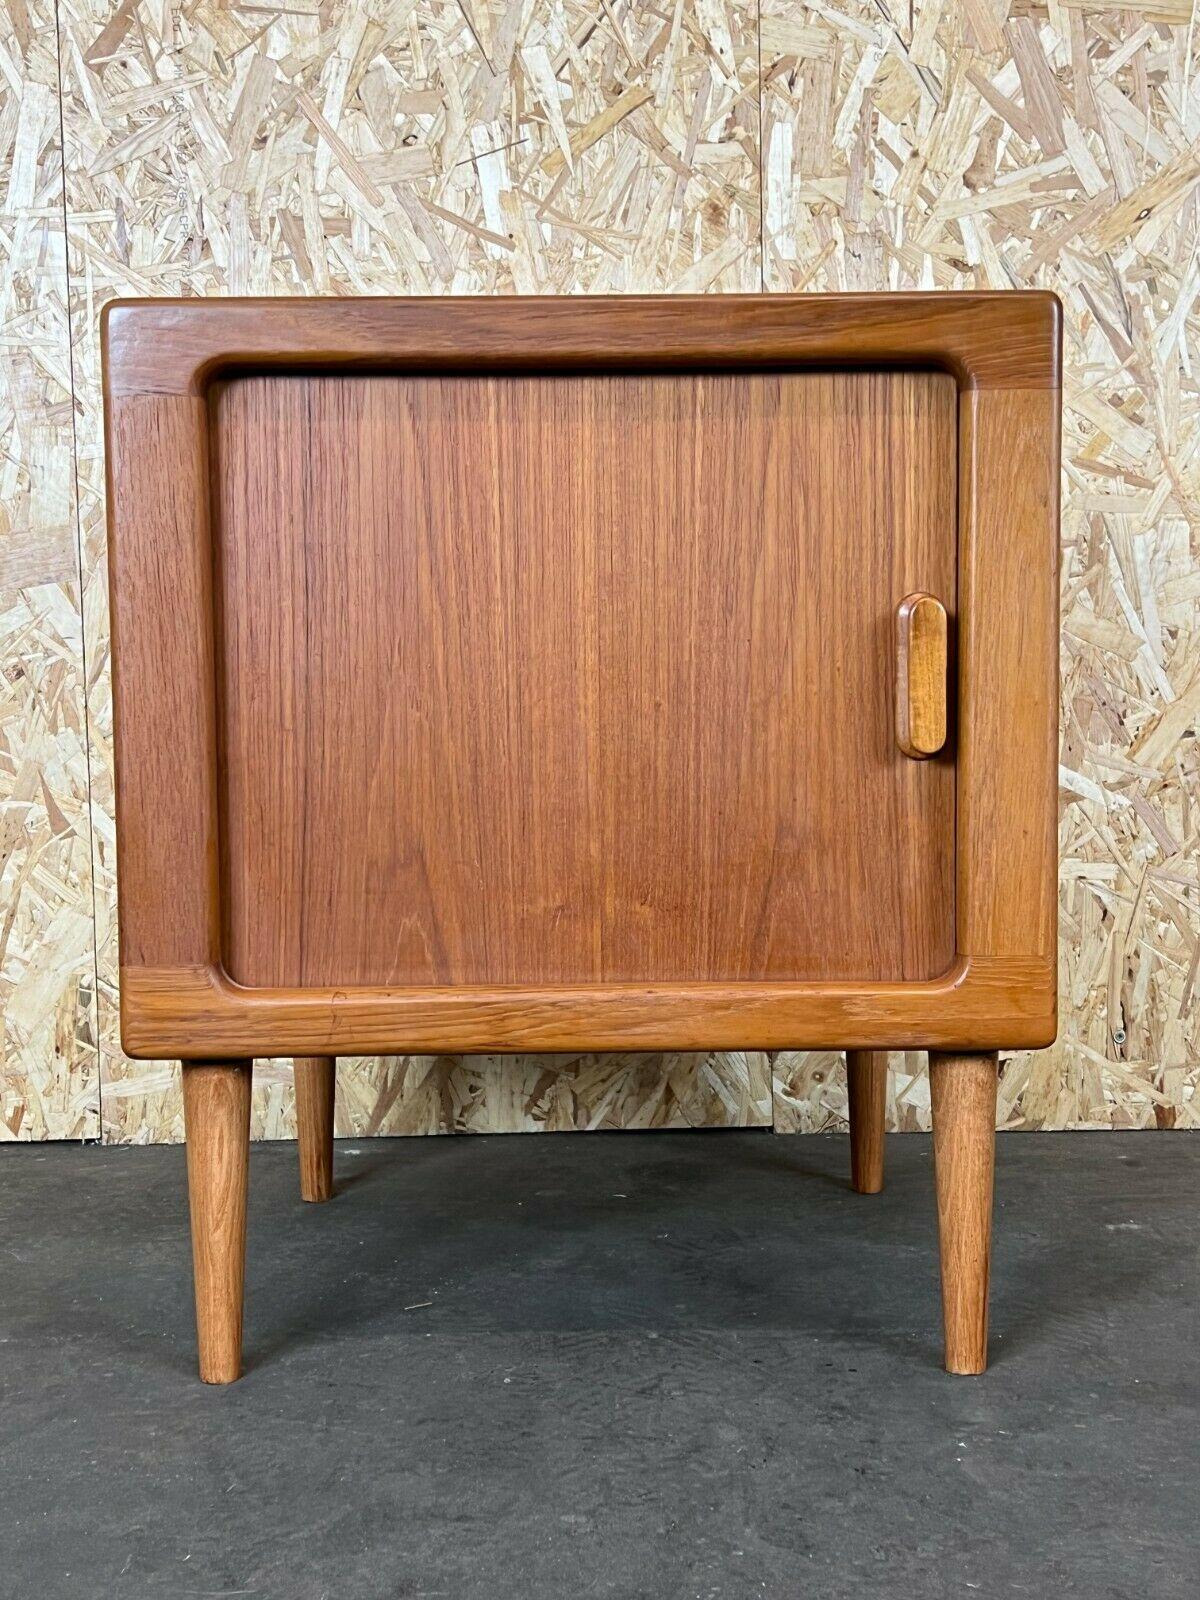 60s 70s teak sideboard Credenza cabinet Danish Modern Design Denmark 70s (15)

Object: sideboard

Manufacturer:

Condition: good

Age: around 1960-1970

Dimensions:

56cm x 50cm x 66cm

Other notes:

The pictures serve as part of the